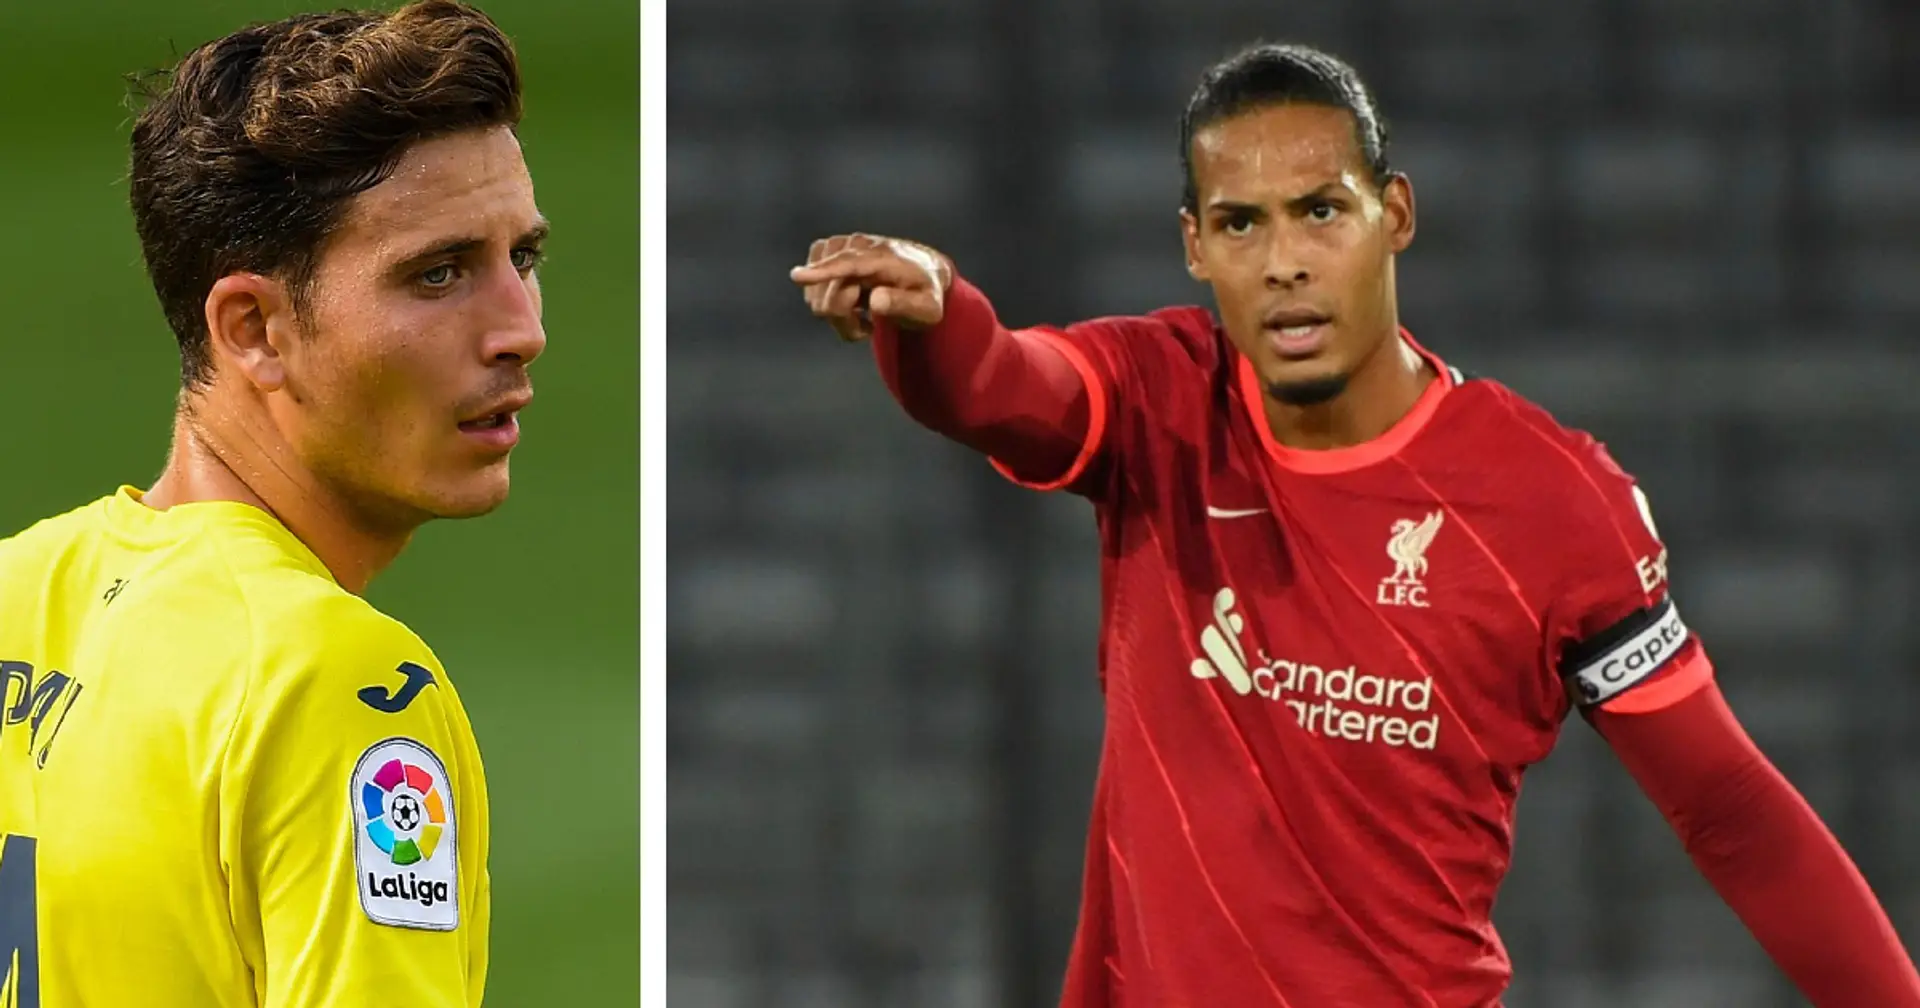 'He is the best in the world right now': Villareal's Pau Torres pays tribute to Van Dijk